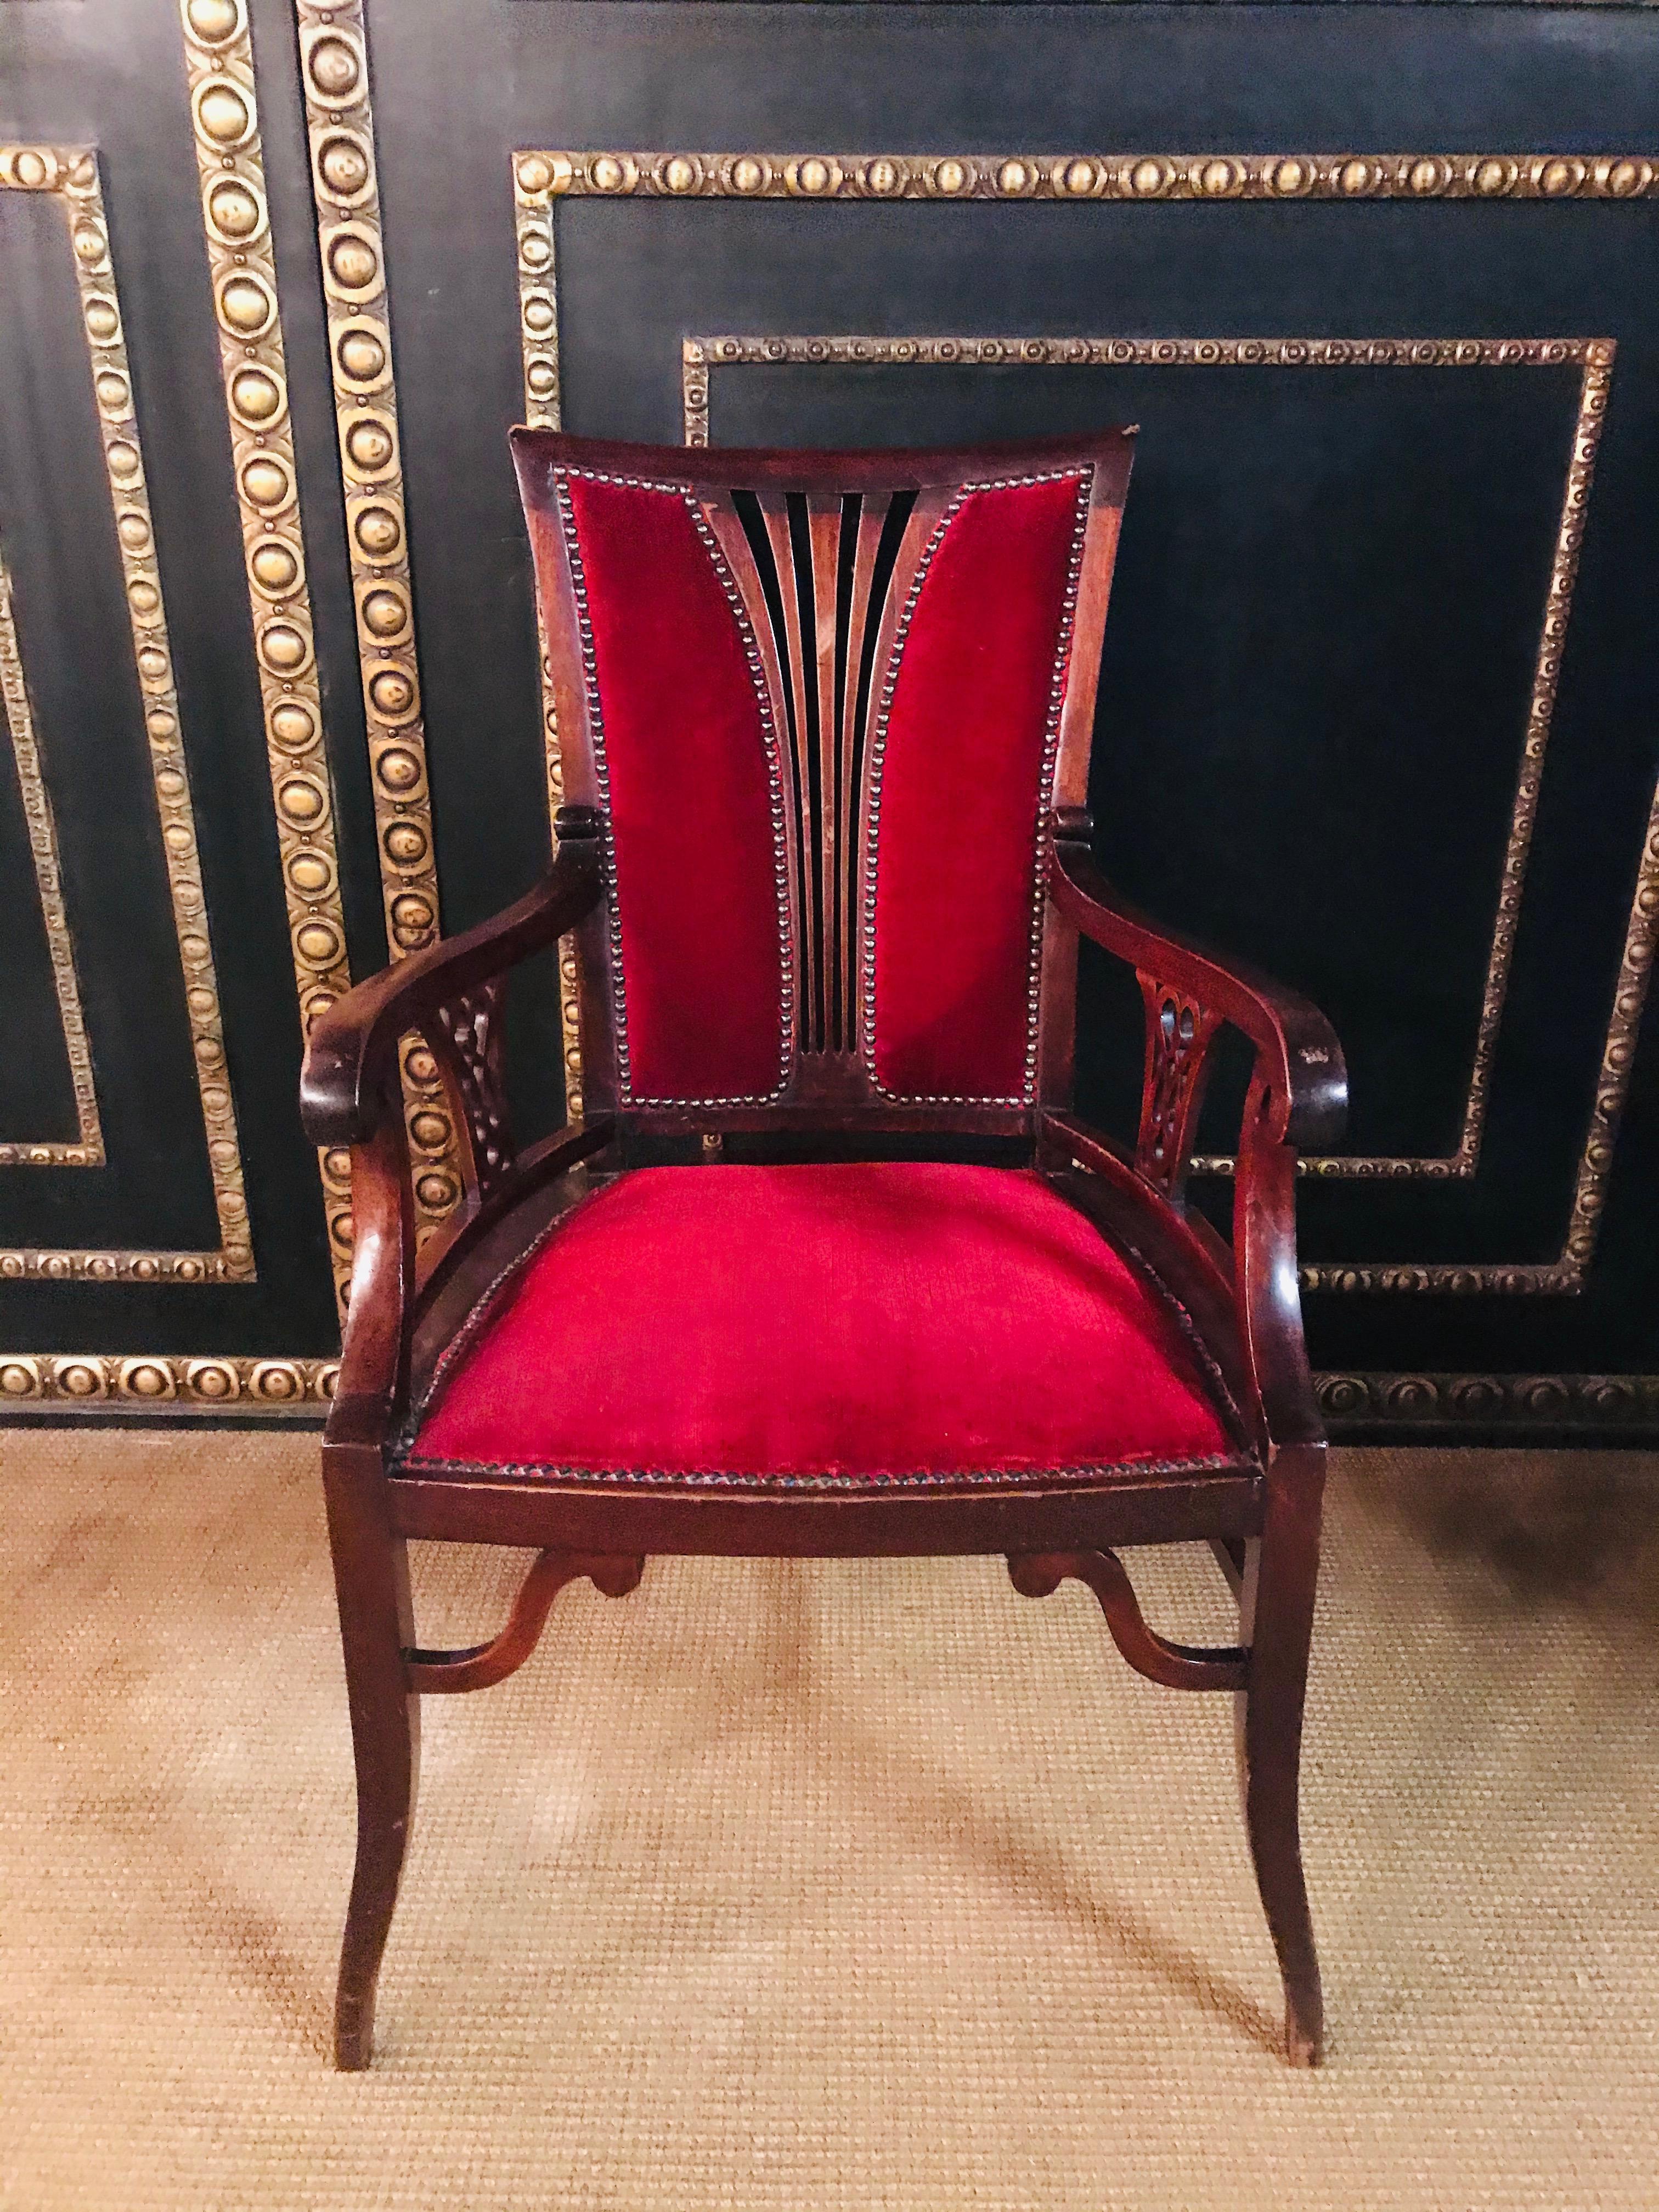 Solid mahogany wood carved backrest.
Armchair with long, curved legs.
Red upholster.